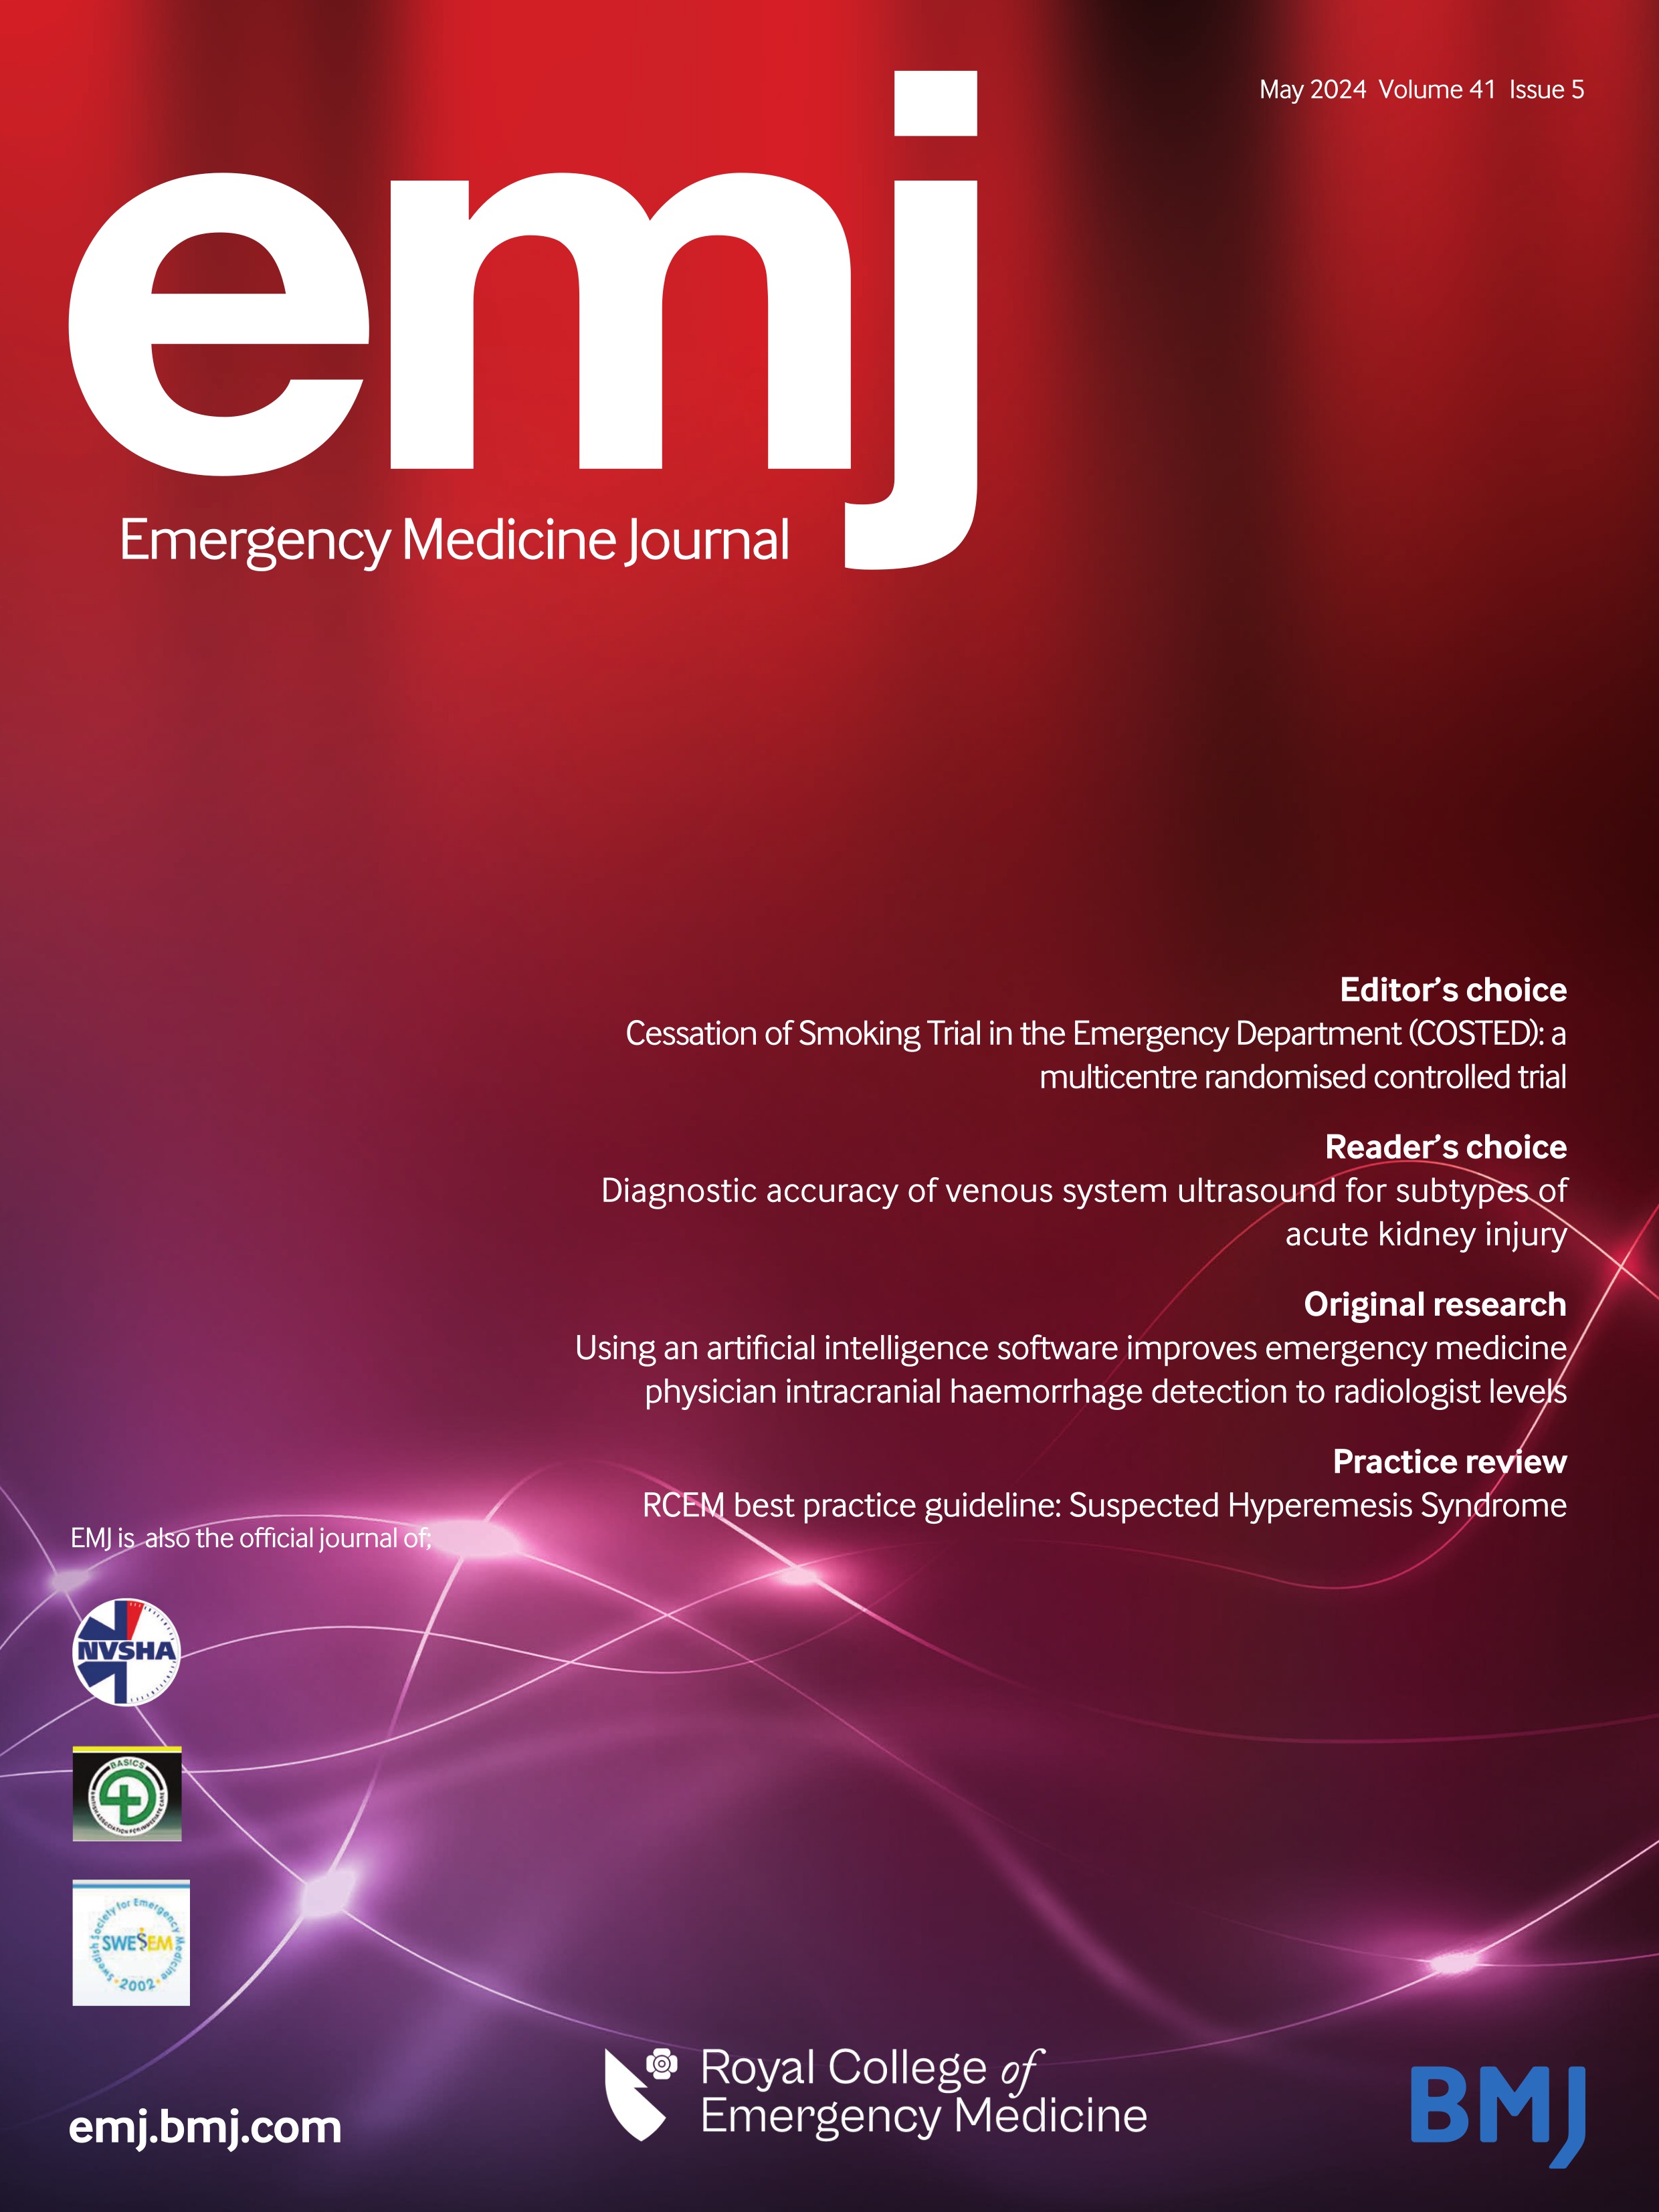 GP patients in the emergency department